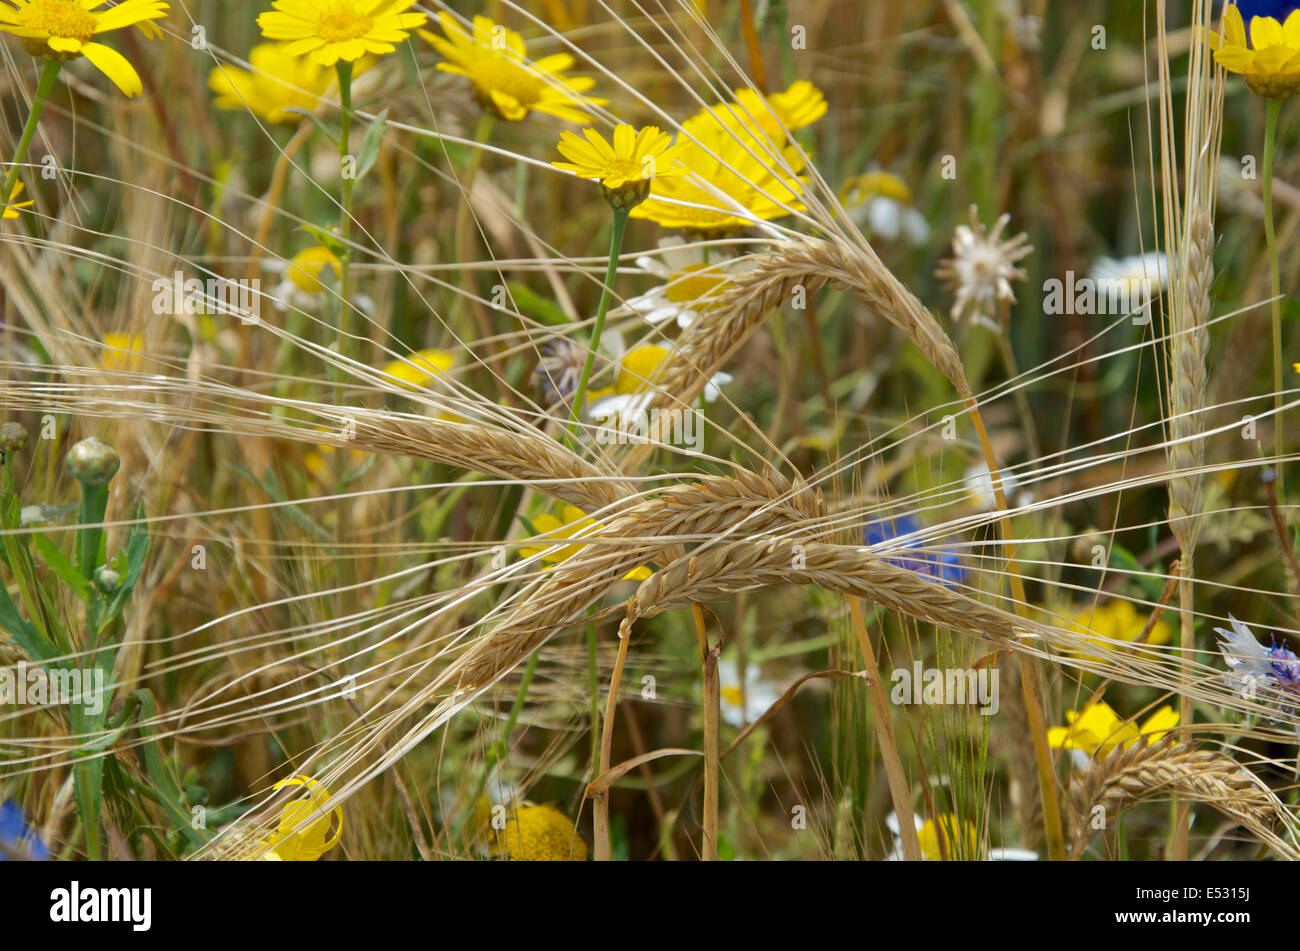 Detail of stalks of wheat with golden ripe heads in a cornfield with corn marigolds, corn chamomile, cornflowers. Stock Photo